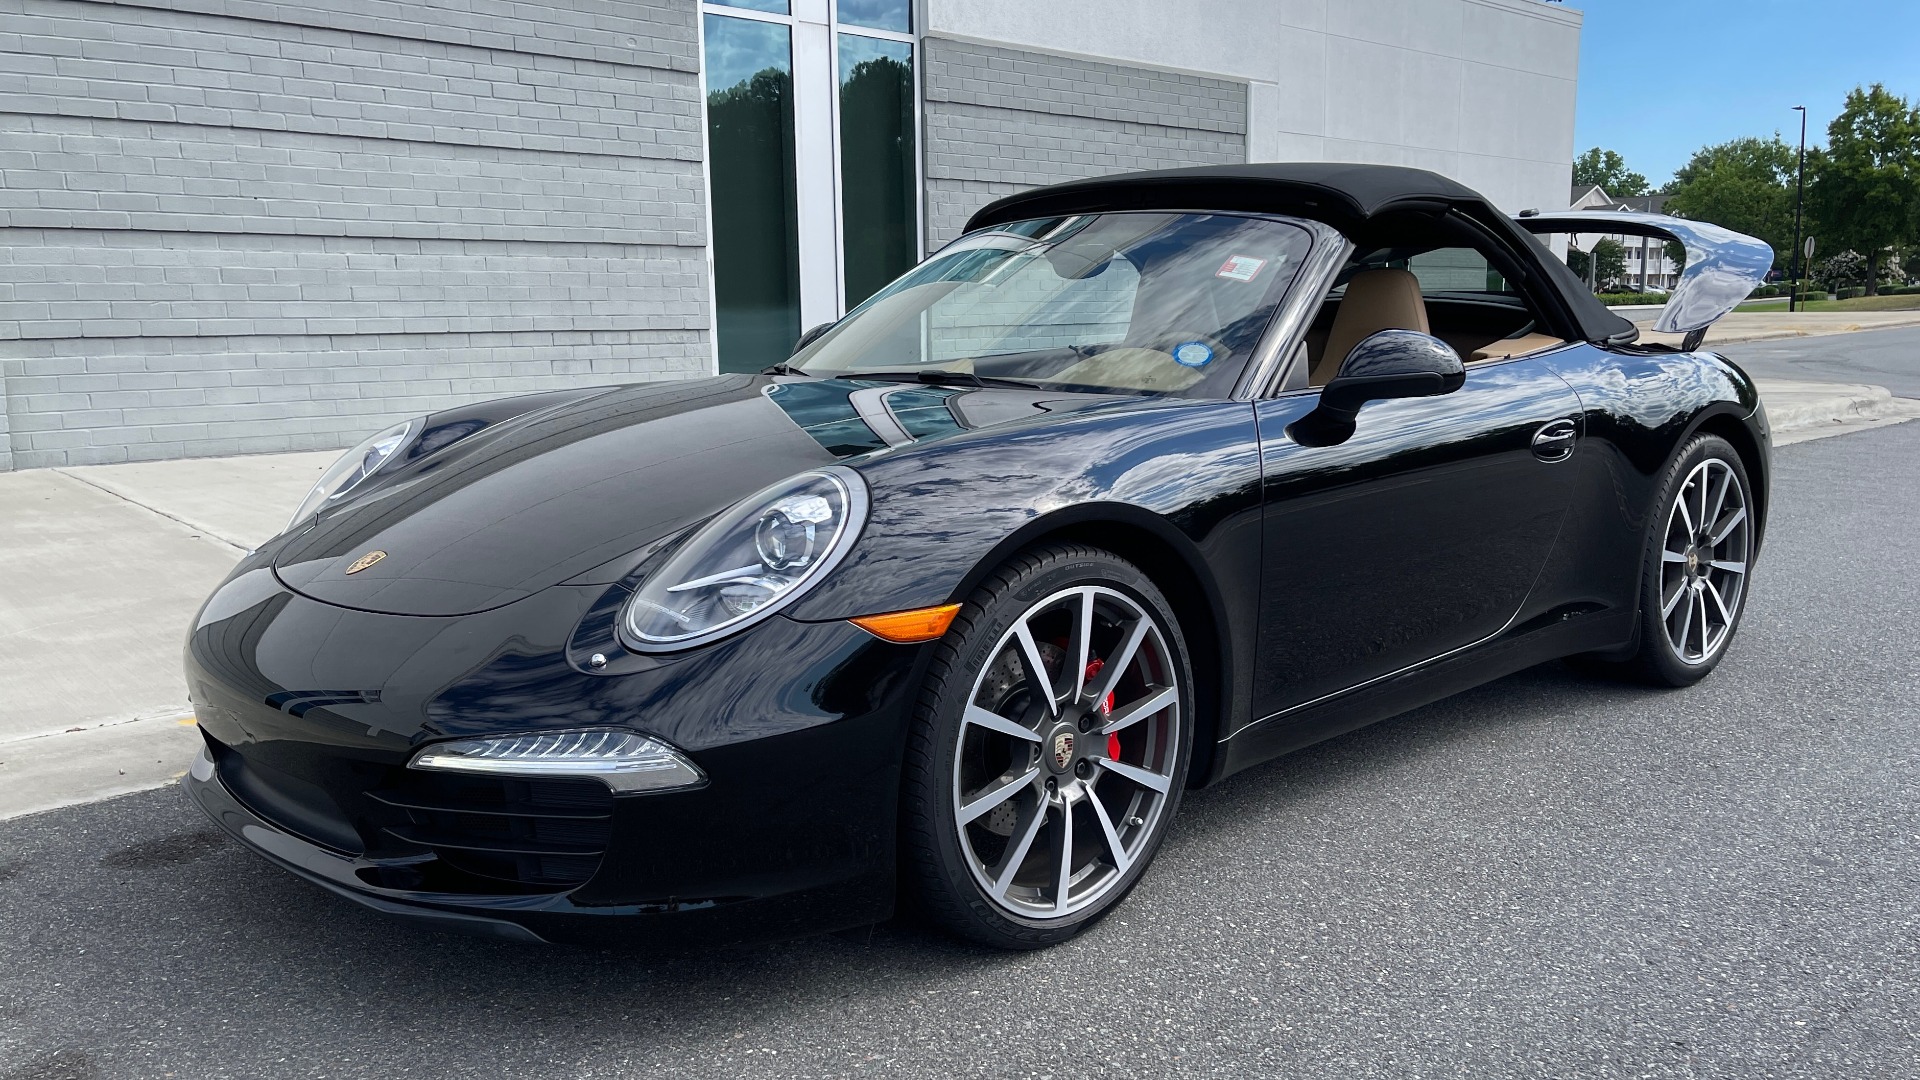 Used 2013 Porsche 911 Carrera PDK//SPORT CHRONO // PWR STEERING PLUS for sale Sold at Formula Imports in Charlotte NC 28227 8